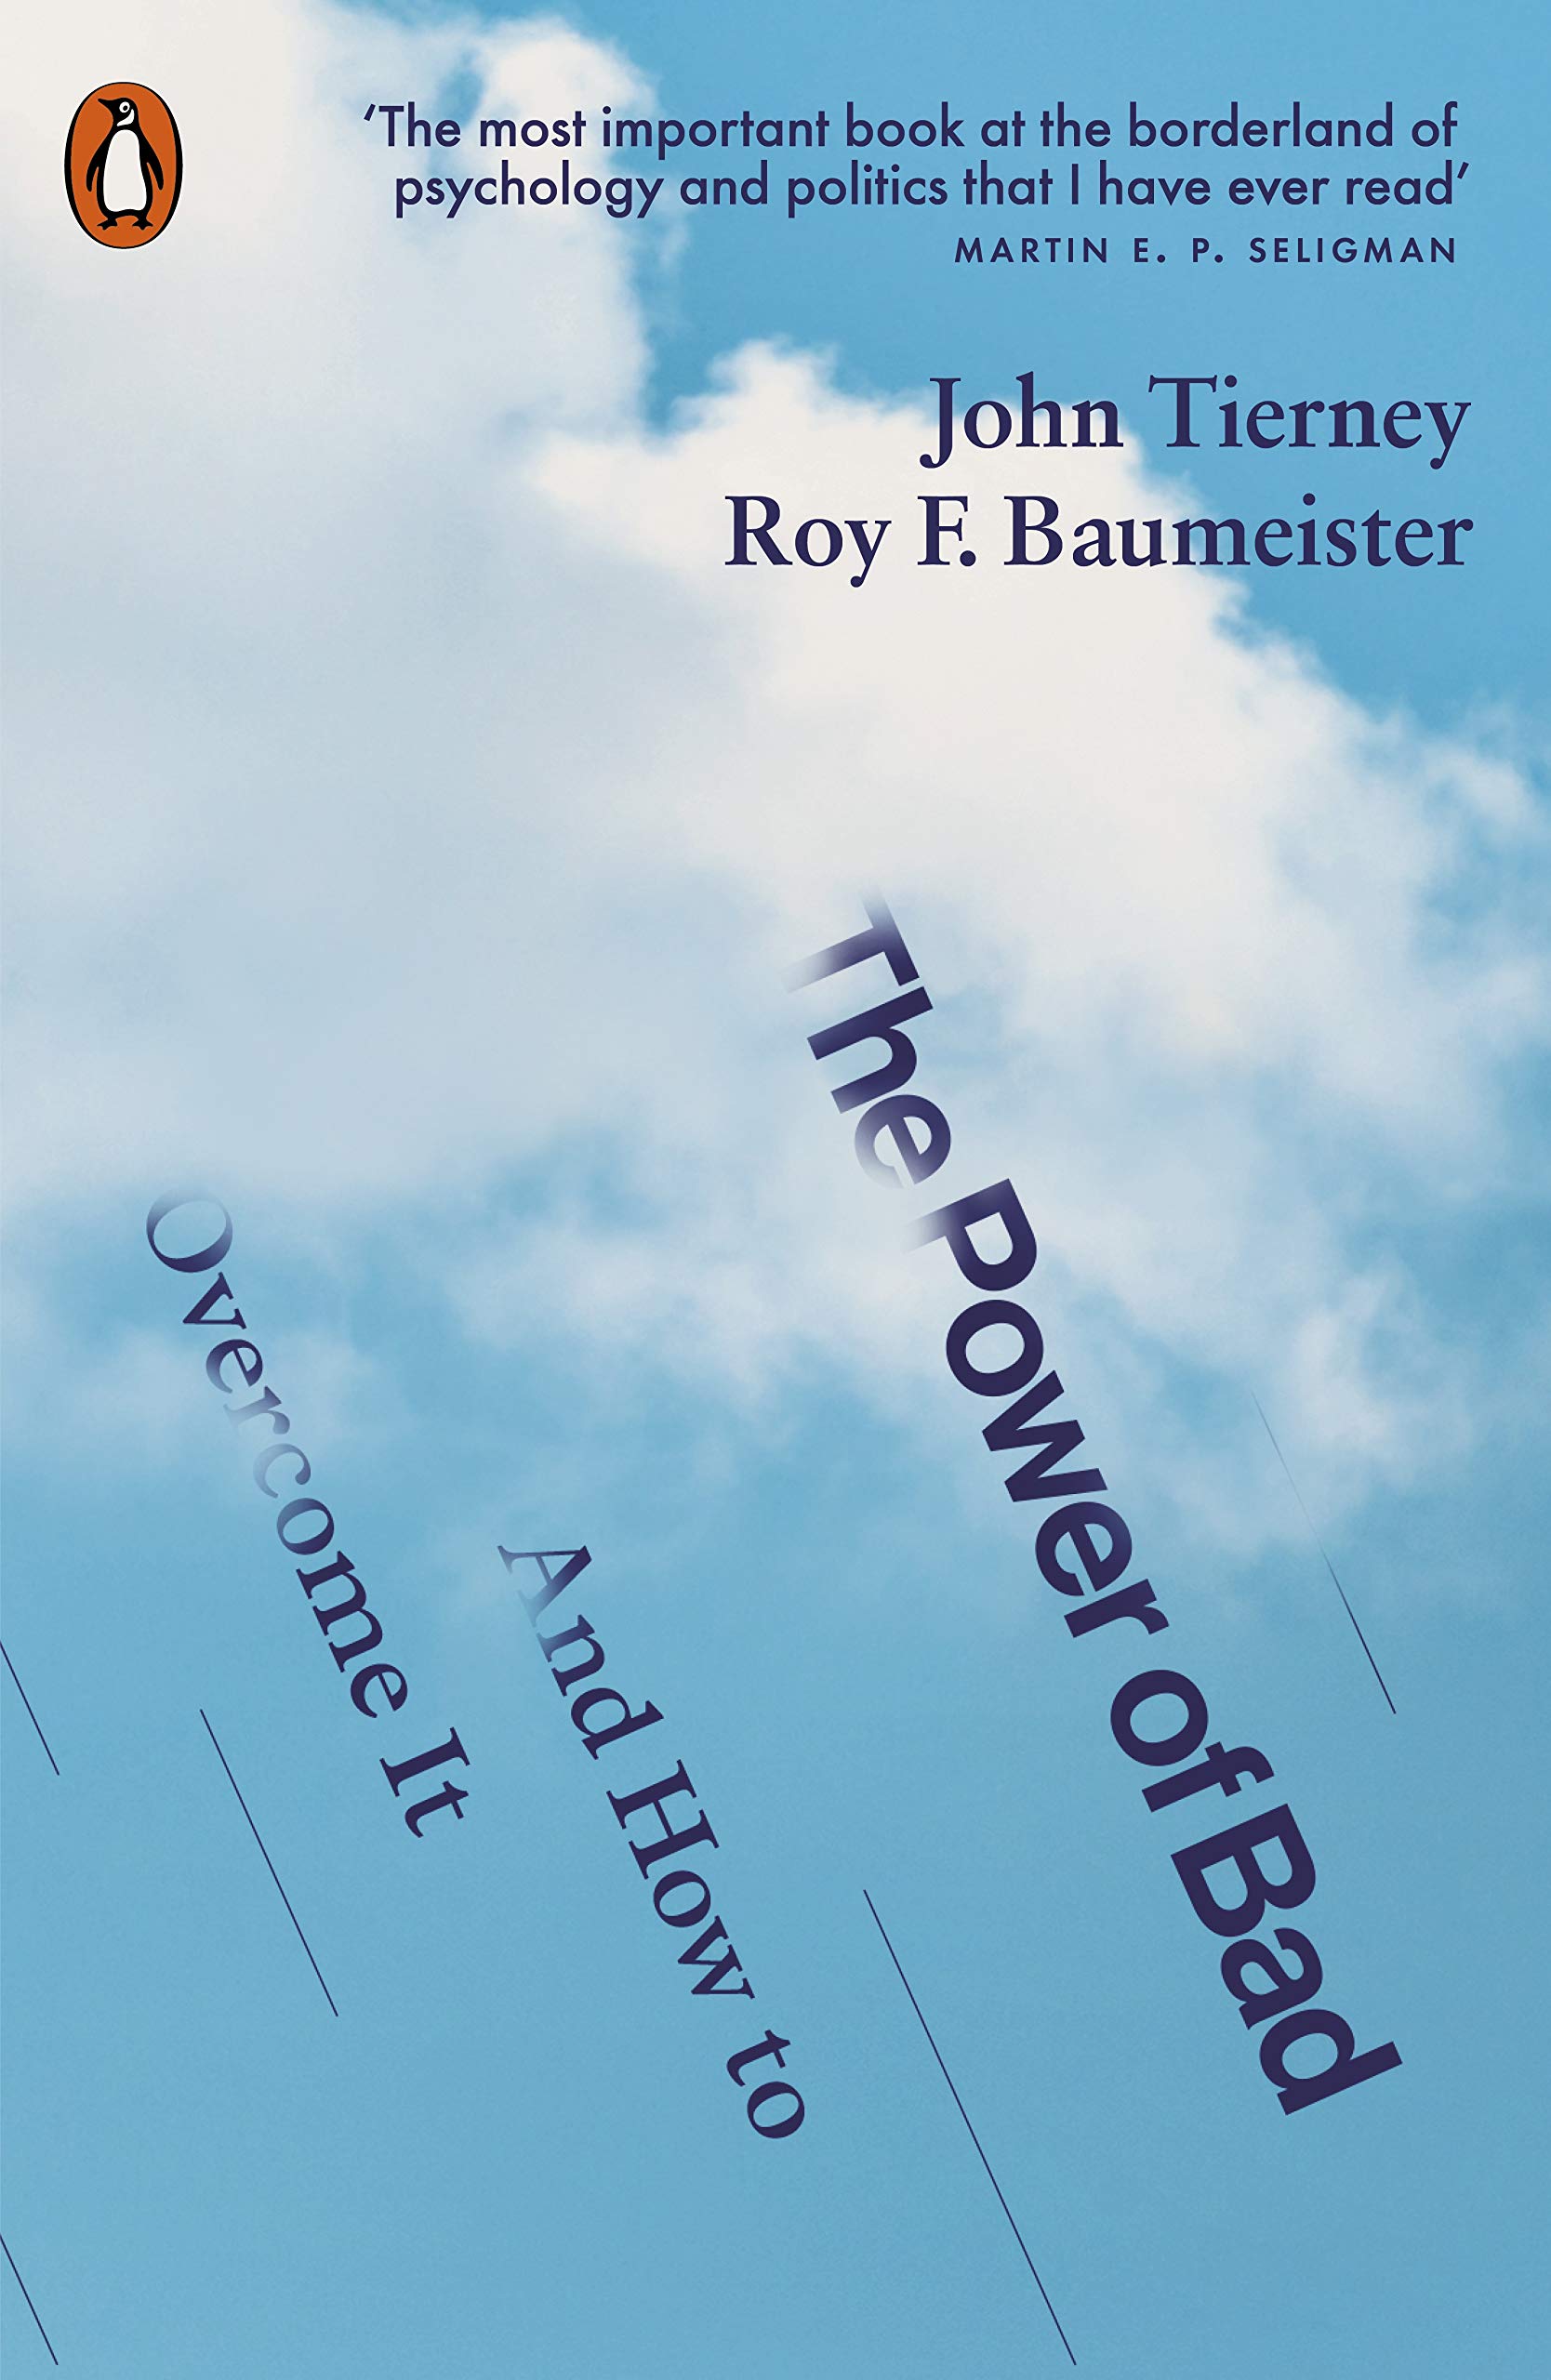 The Power of Bad | John Tierney, Roy F. Baumeister